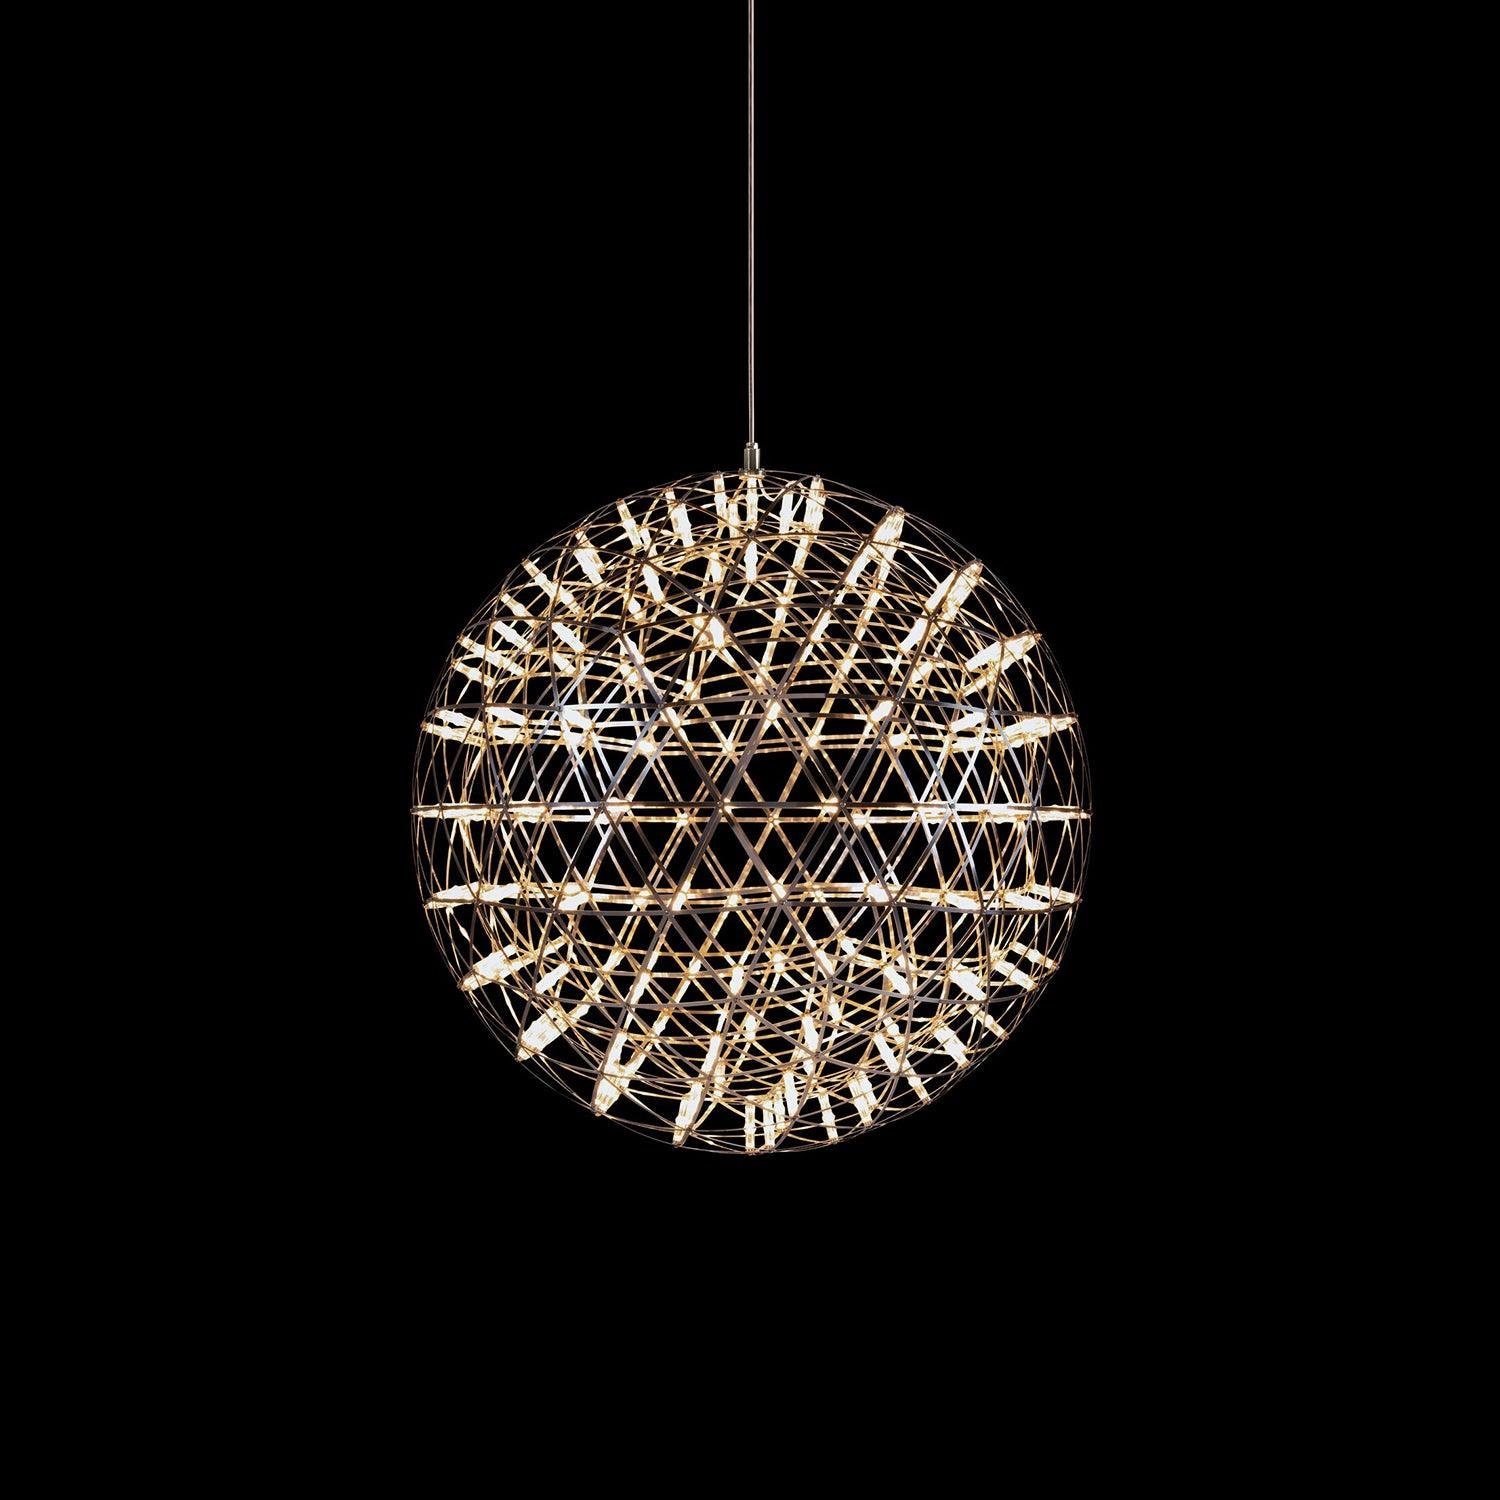 Spark Ball Pendant Light with 162 heads and a diameter of 110cm in Cool White.